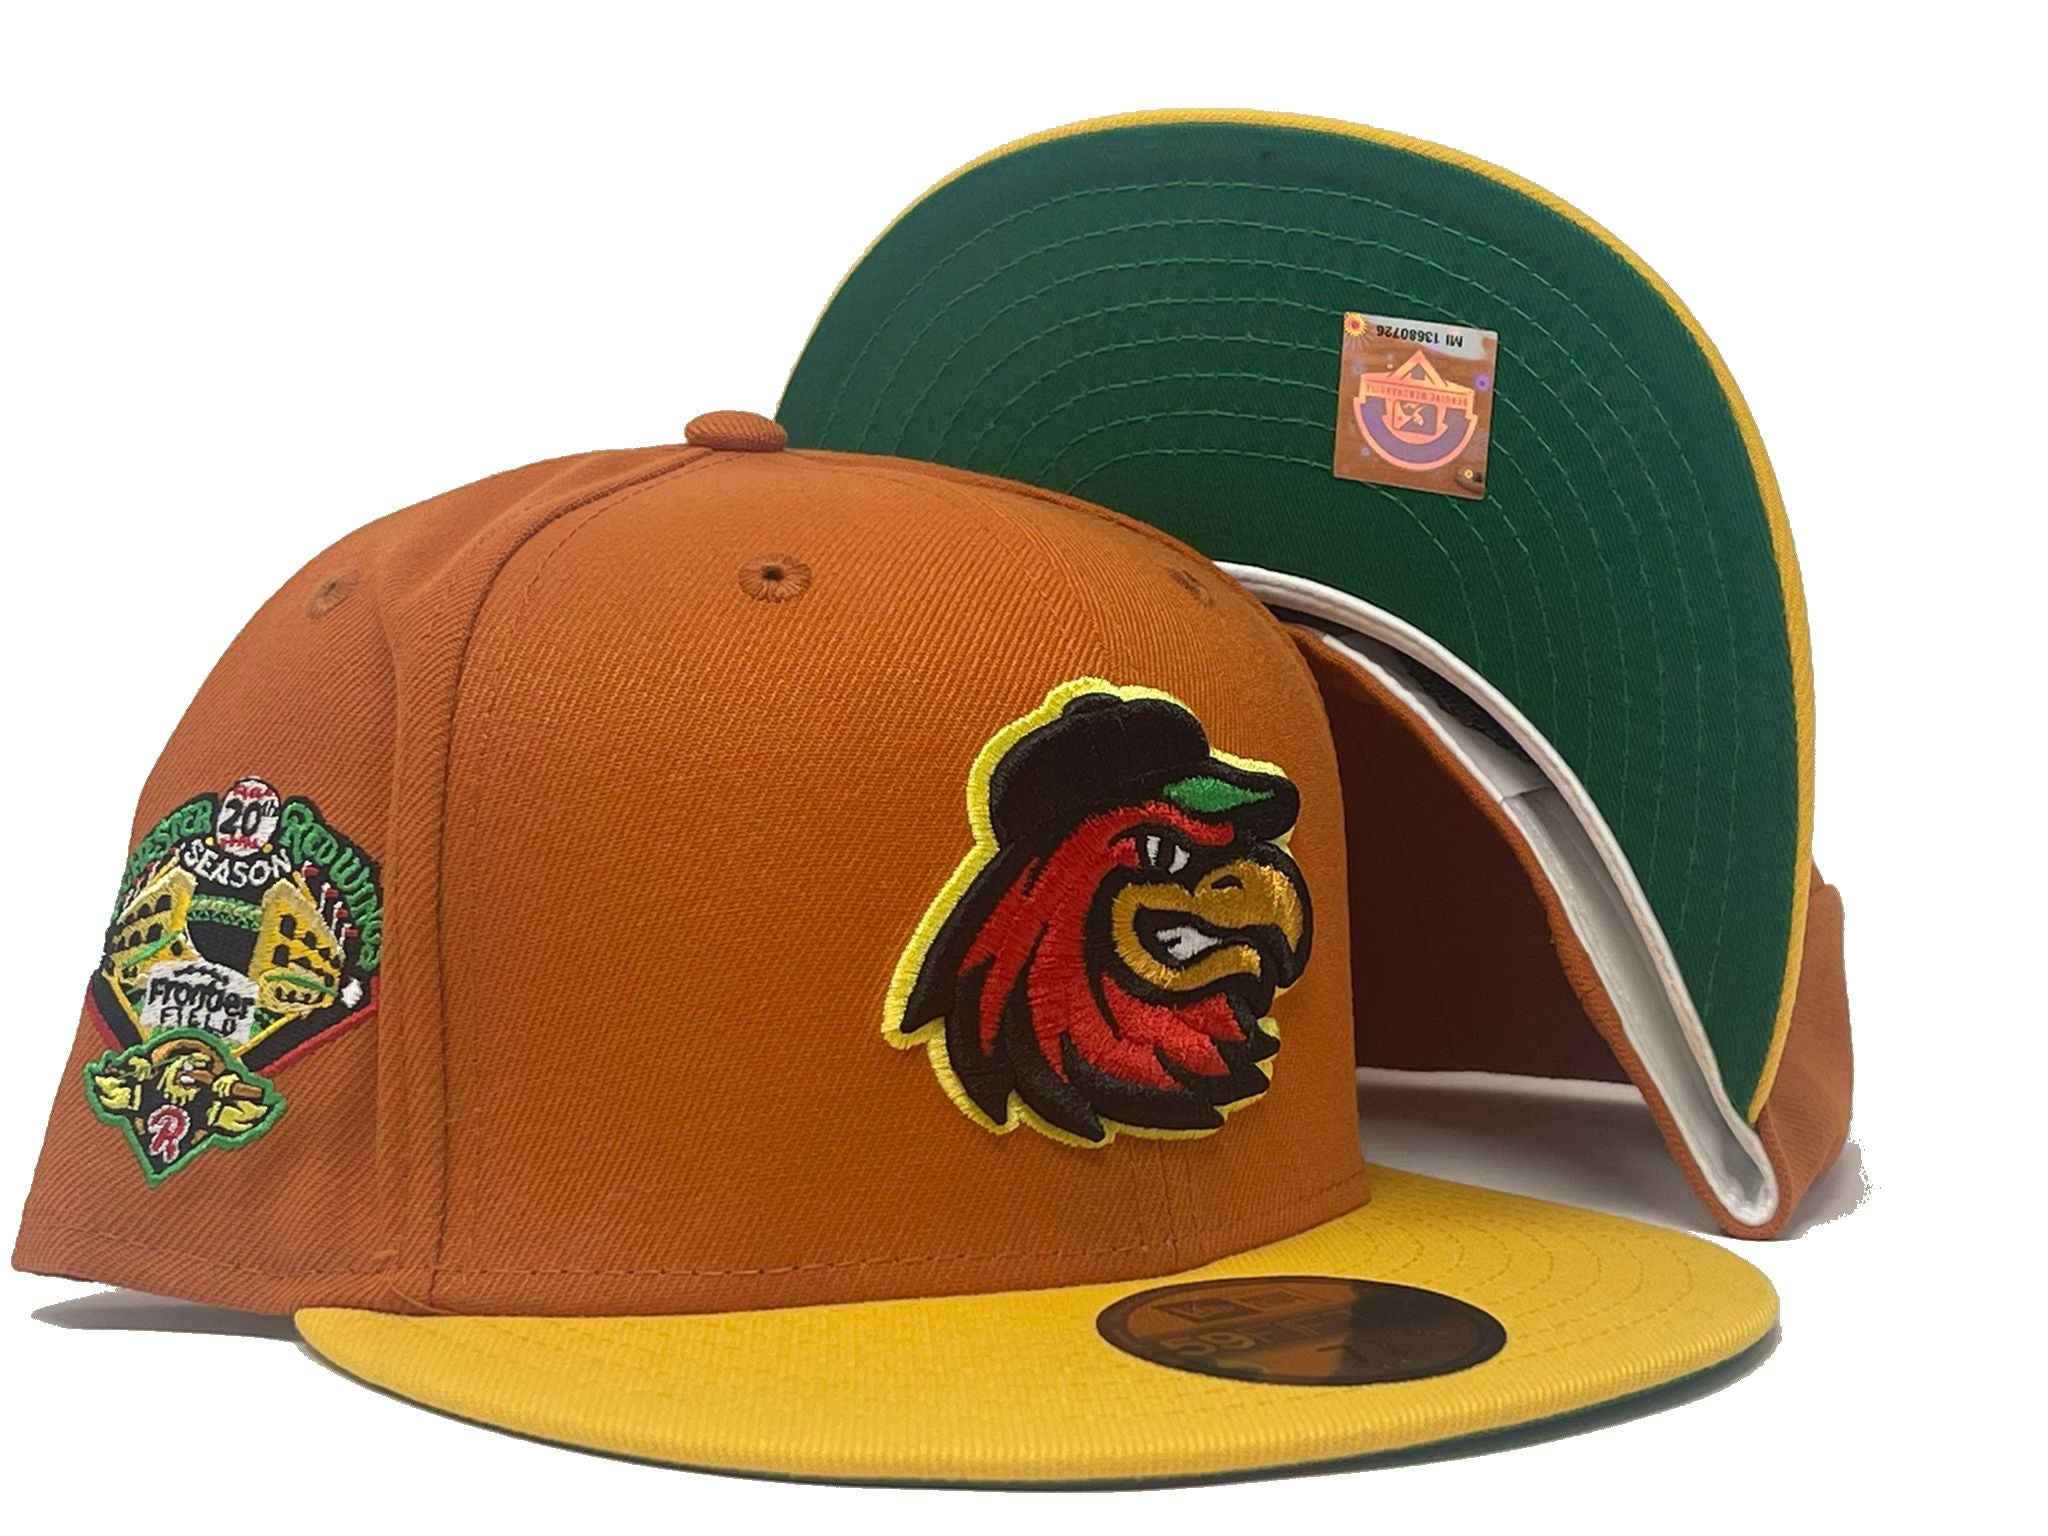 Rochester Red Wings Plates Pride Cap